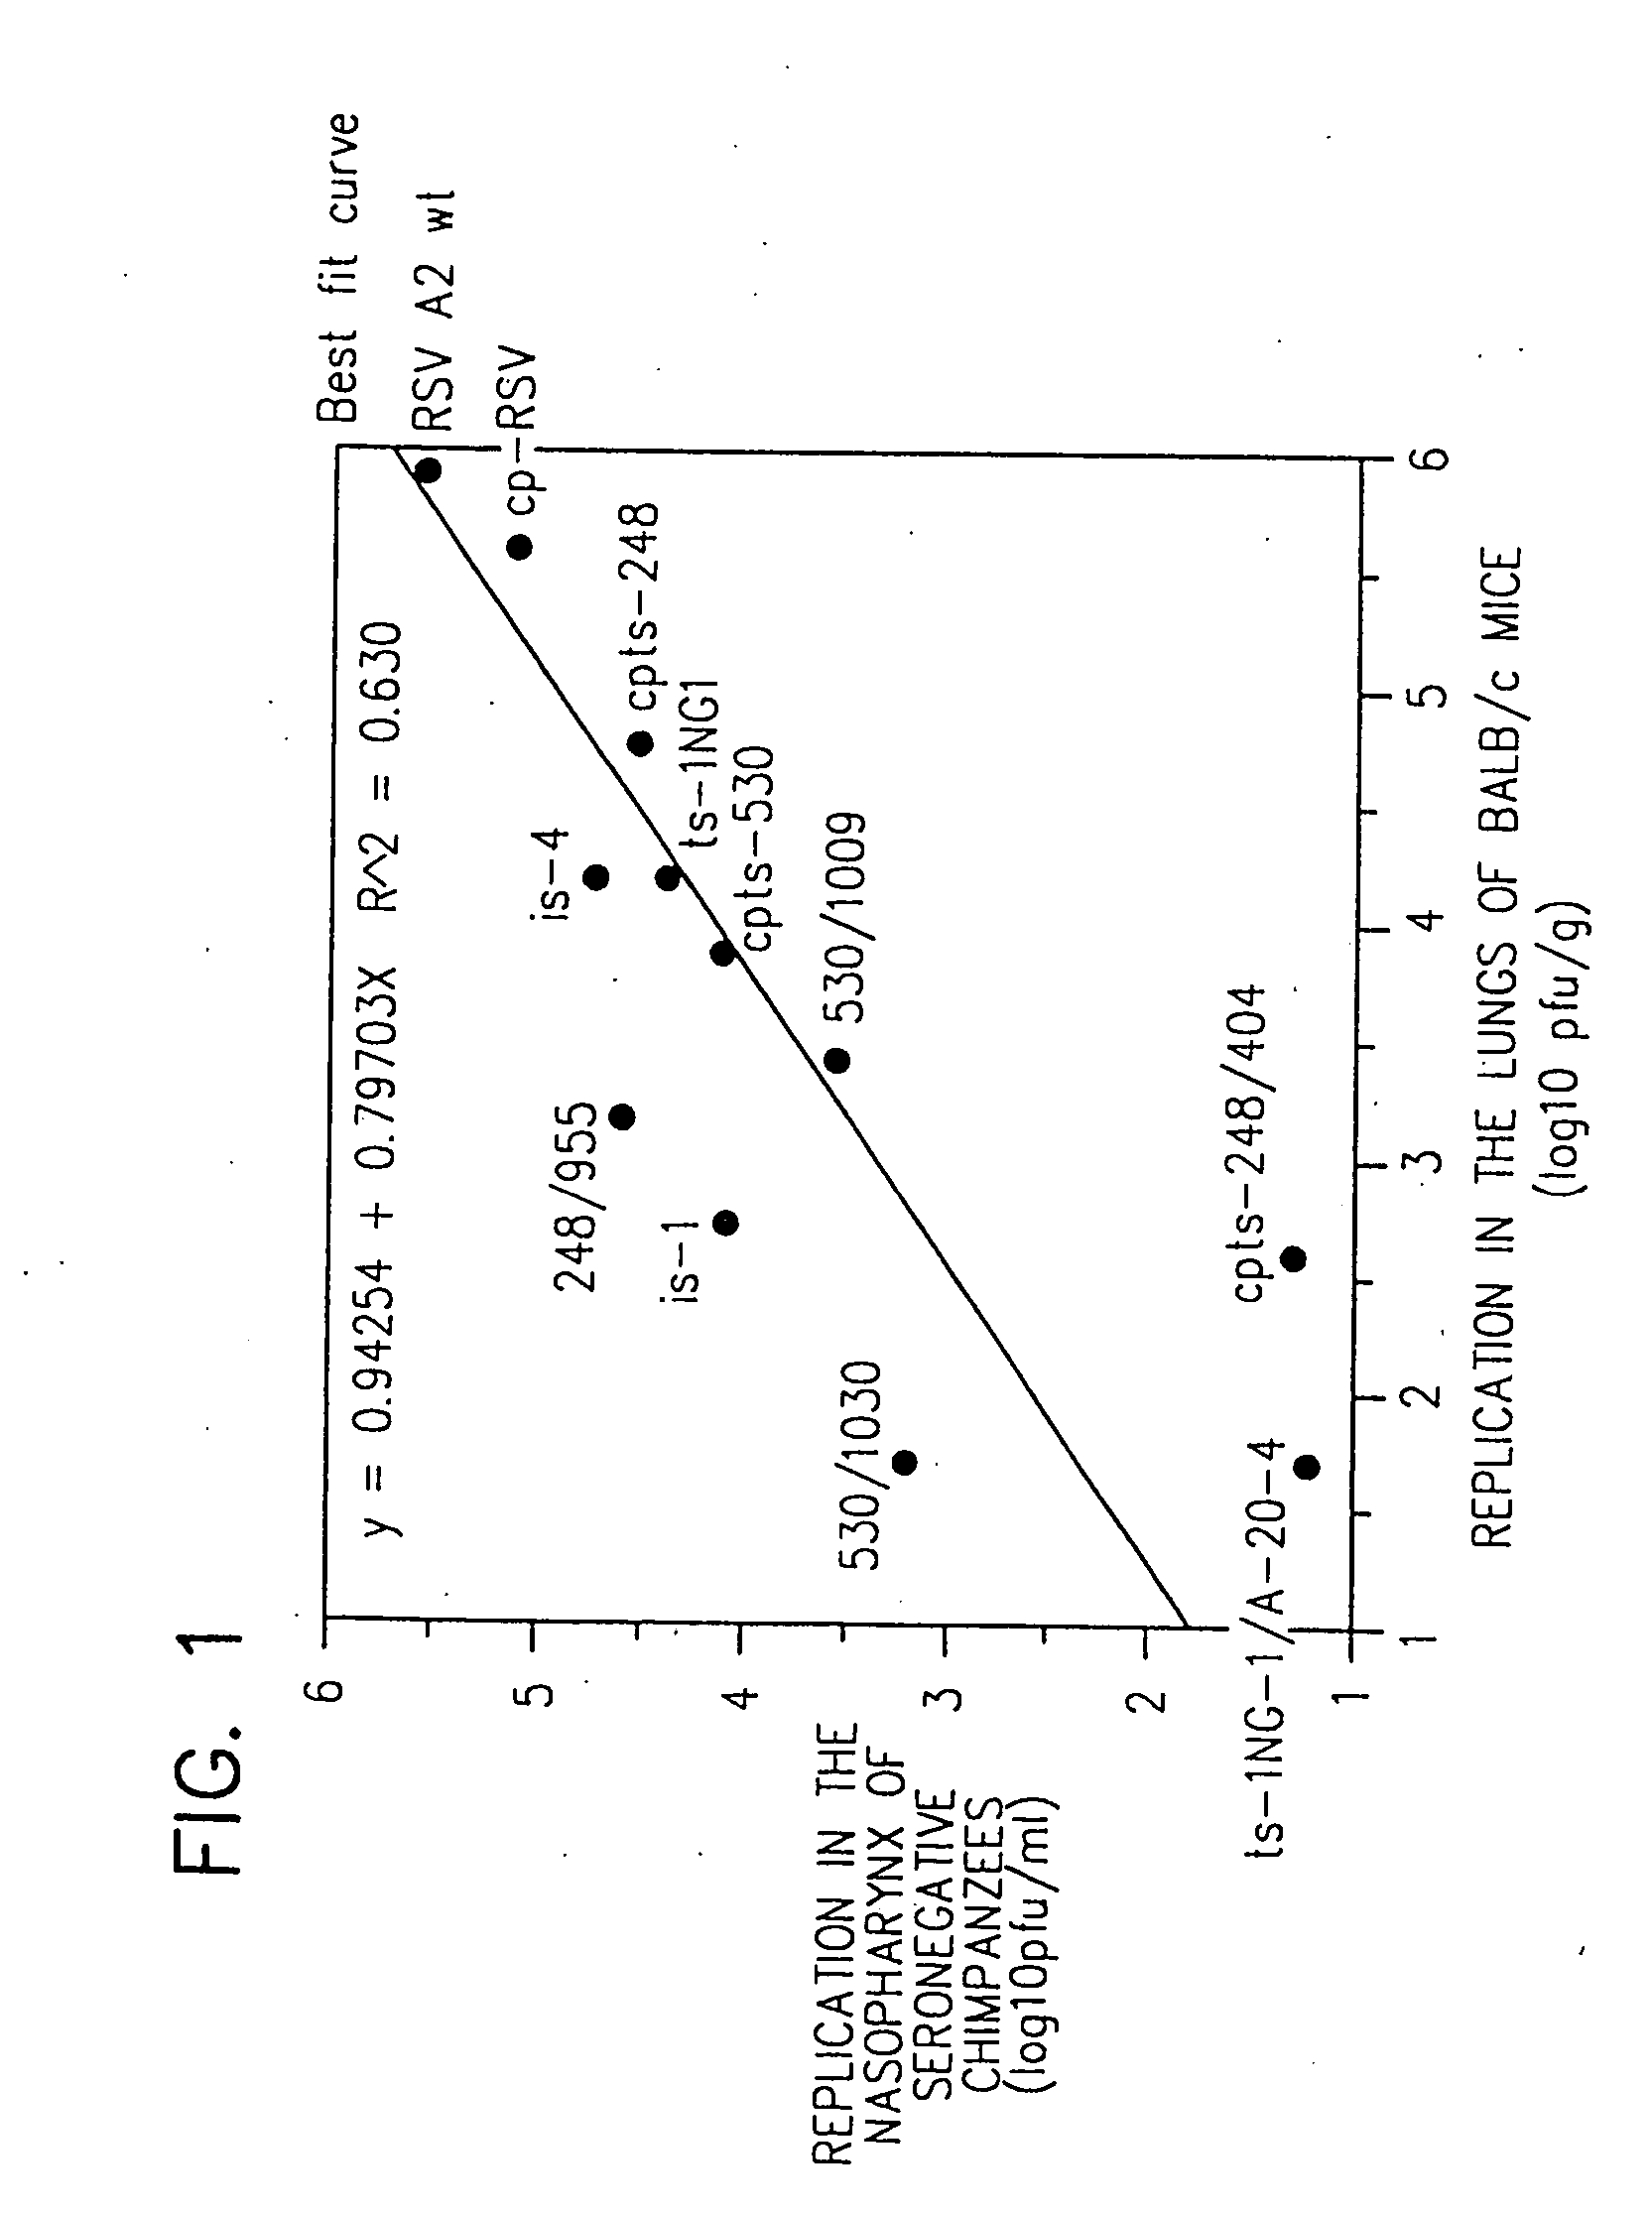 Production of attenuated chimeric respiratory syncytial virus vaccines from cloned nucleotide sequences